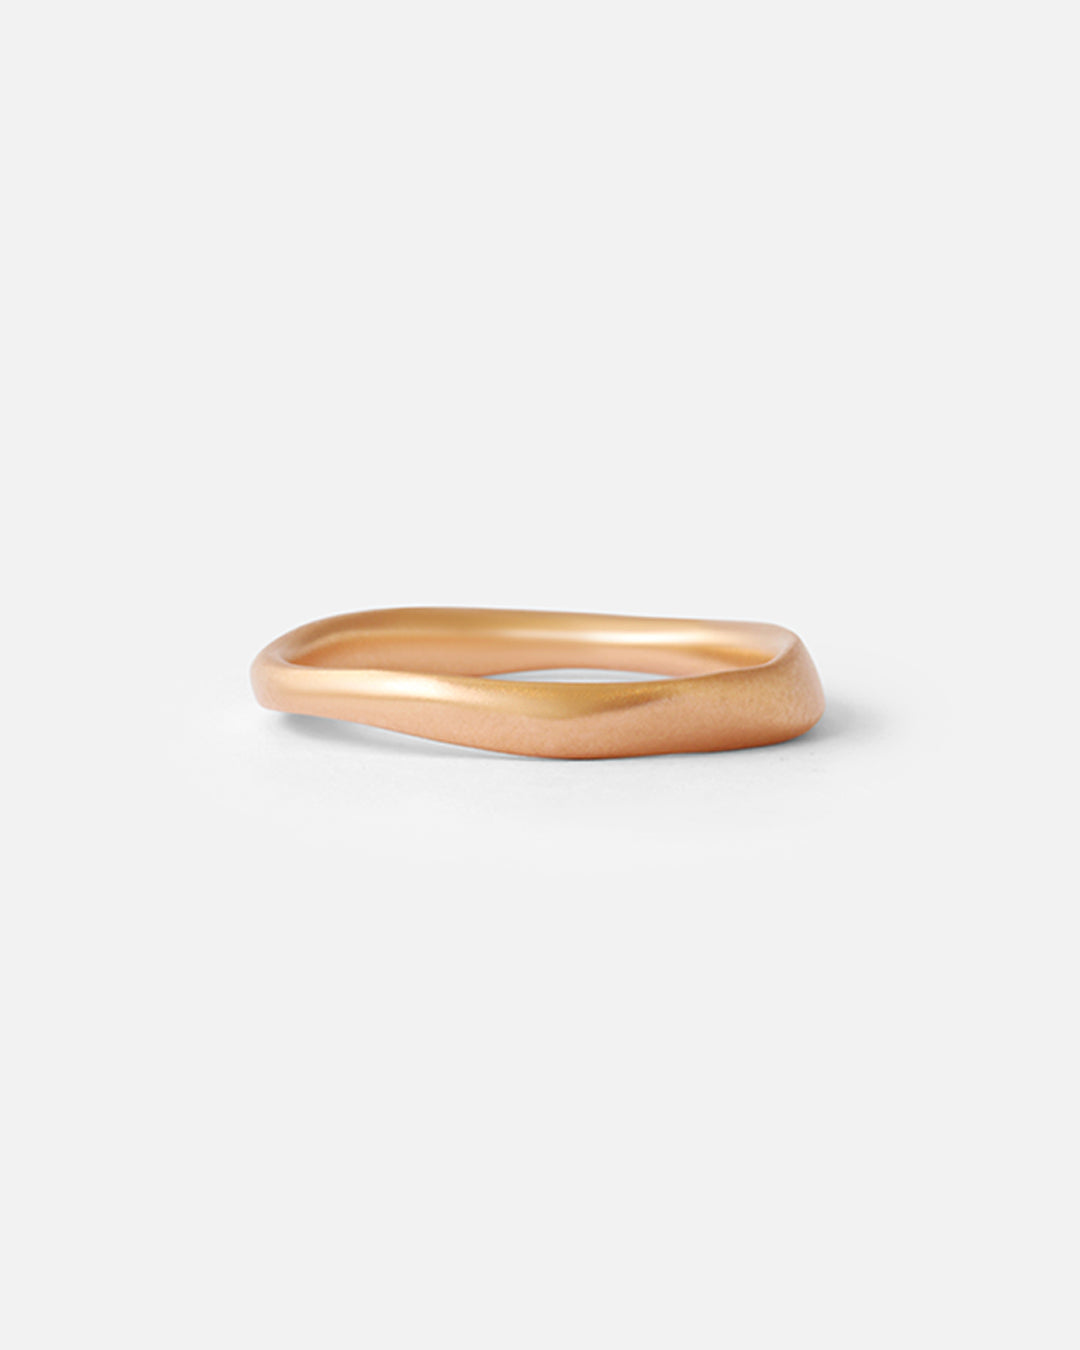 Pebble S / Band Ready To Ship 18k Pink Gold with Sandblasted Finish 6.5 By Hiroyo in Wedding Bands Category